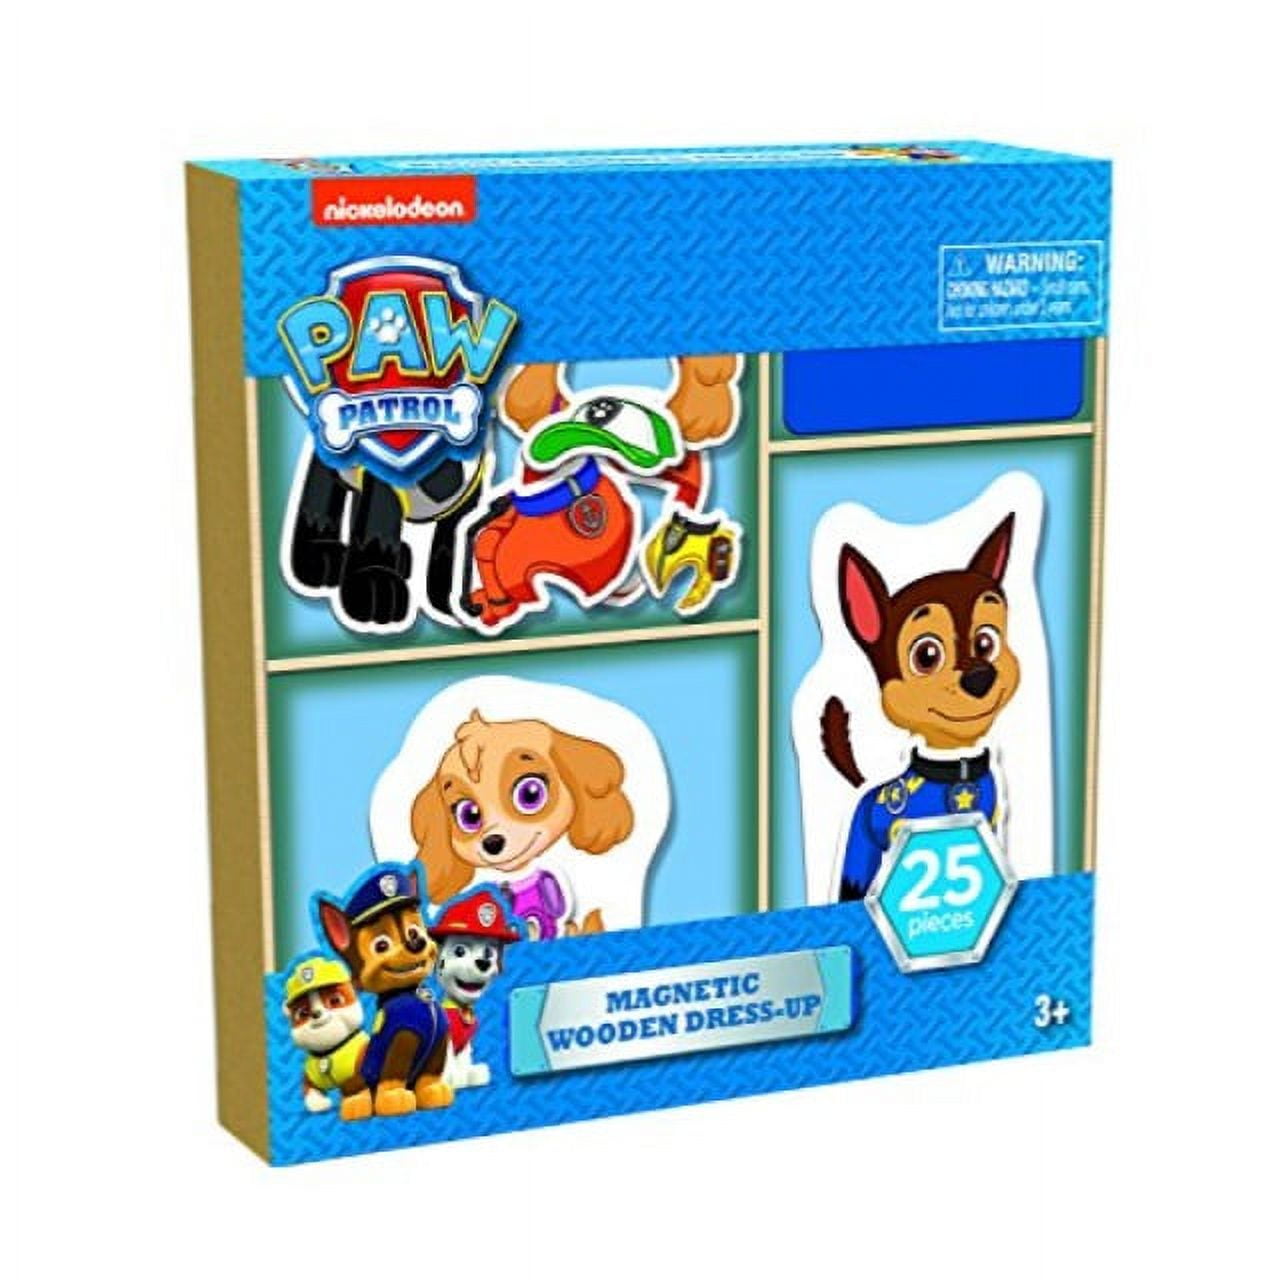 Paw Patrol 25 piece Magnetic Wood Dress Up Puzzle